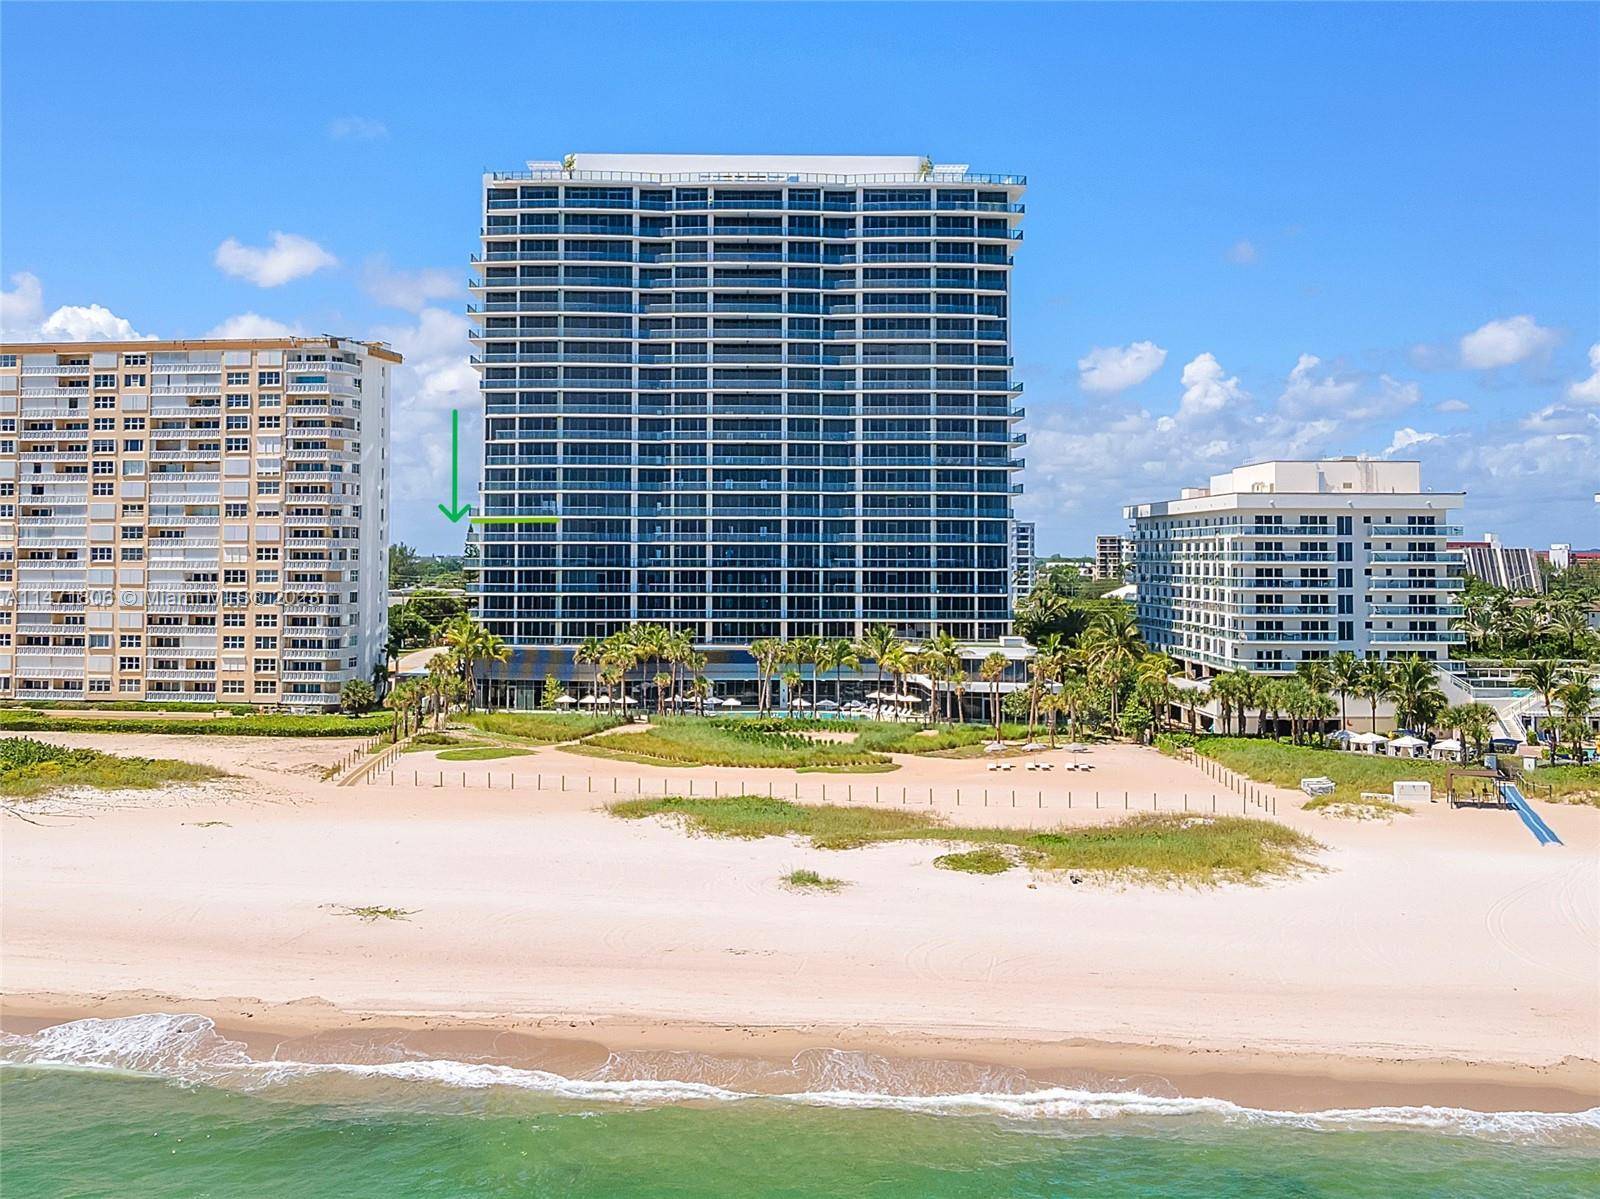 Stunning 3 Bed den 3. 5 Bth, brand new SE flow throw Corner residence, with spectacular views from the 9th floor of the Ocean, beach, intracoastal, and city !